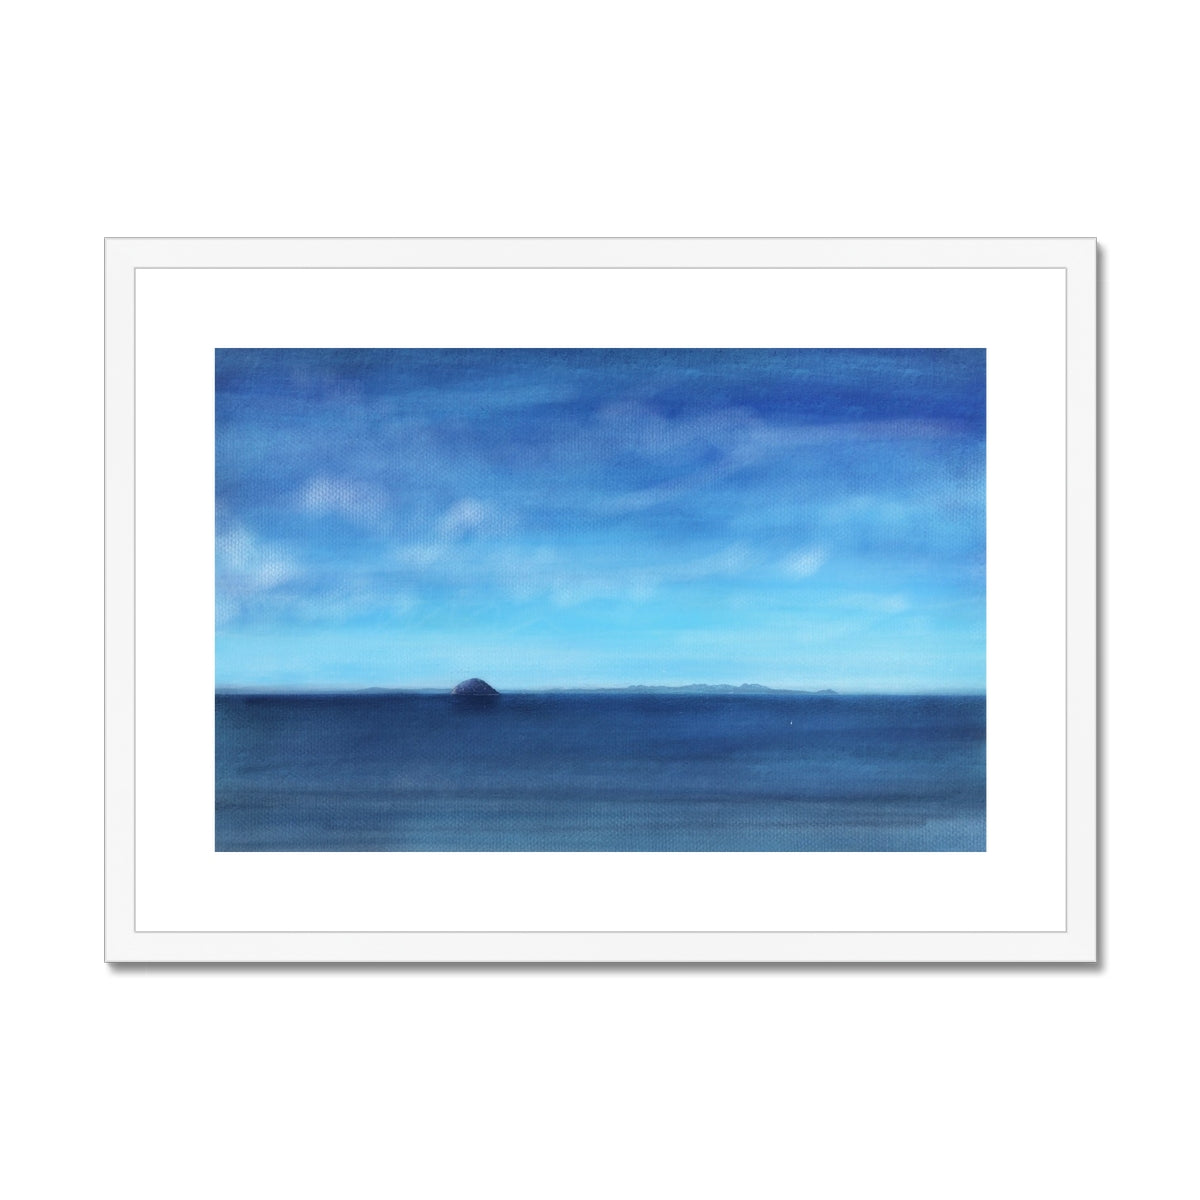 Ailsa Craig & Arran Painting | Framed & Mounted Prints From Scotland-Framed & Mounted Prints-Arran Art Gallery-A2 Landscape-White Frame-Paintings, Prints, Homeware, Art Gifts From Scotland By Scottish Artist Kevin Hunter